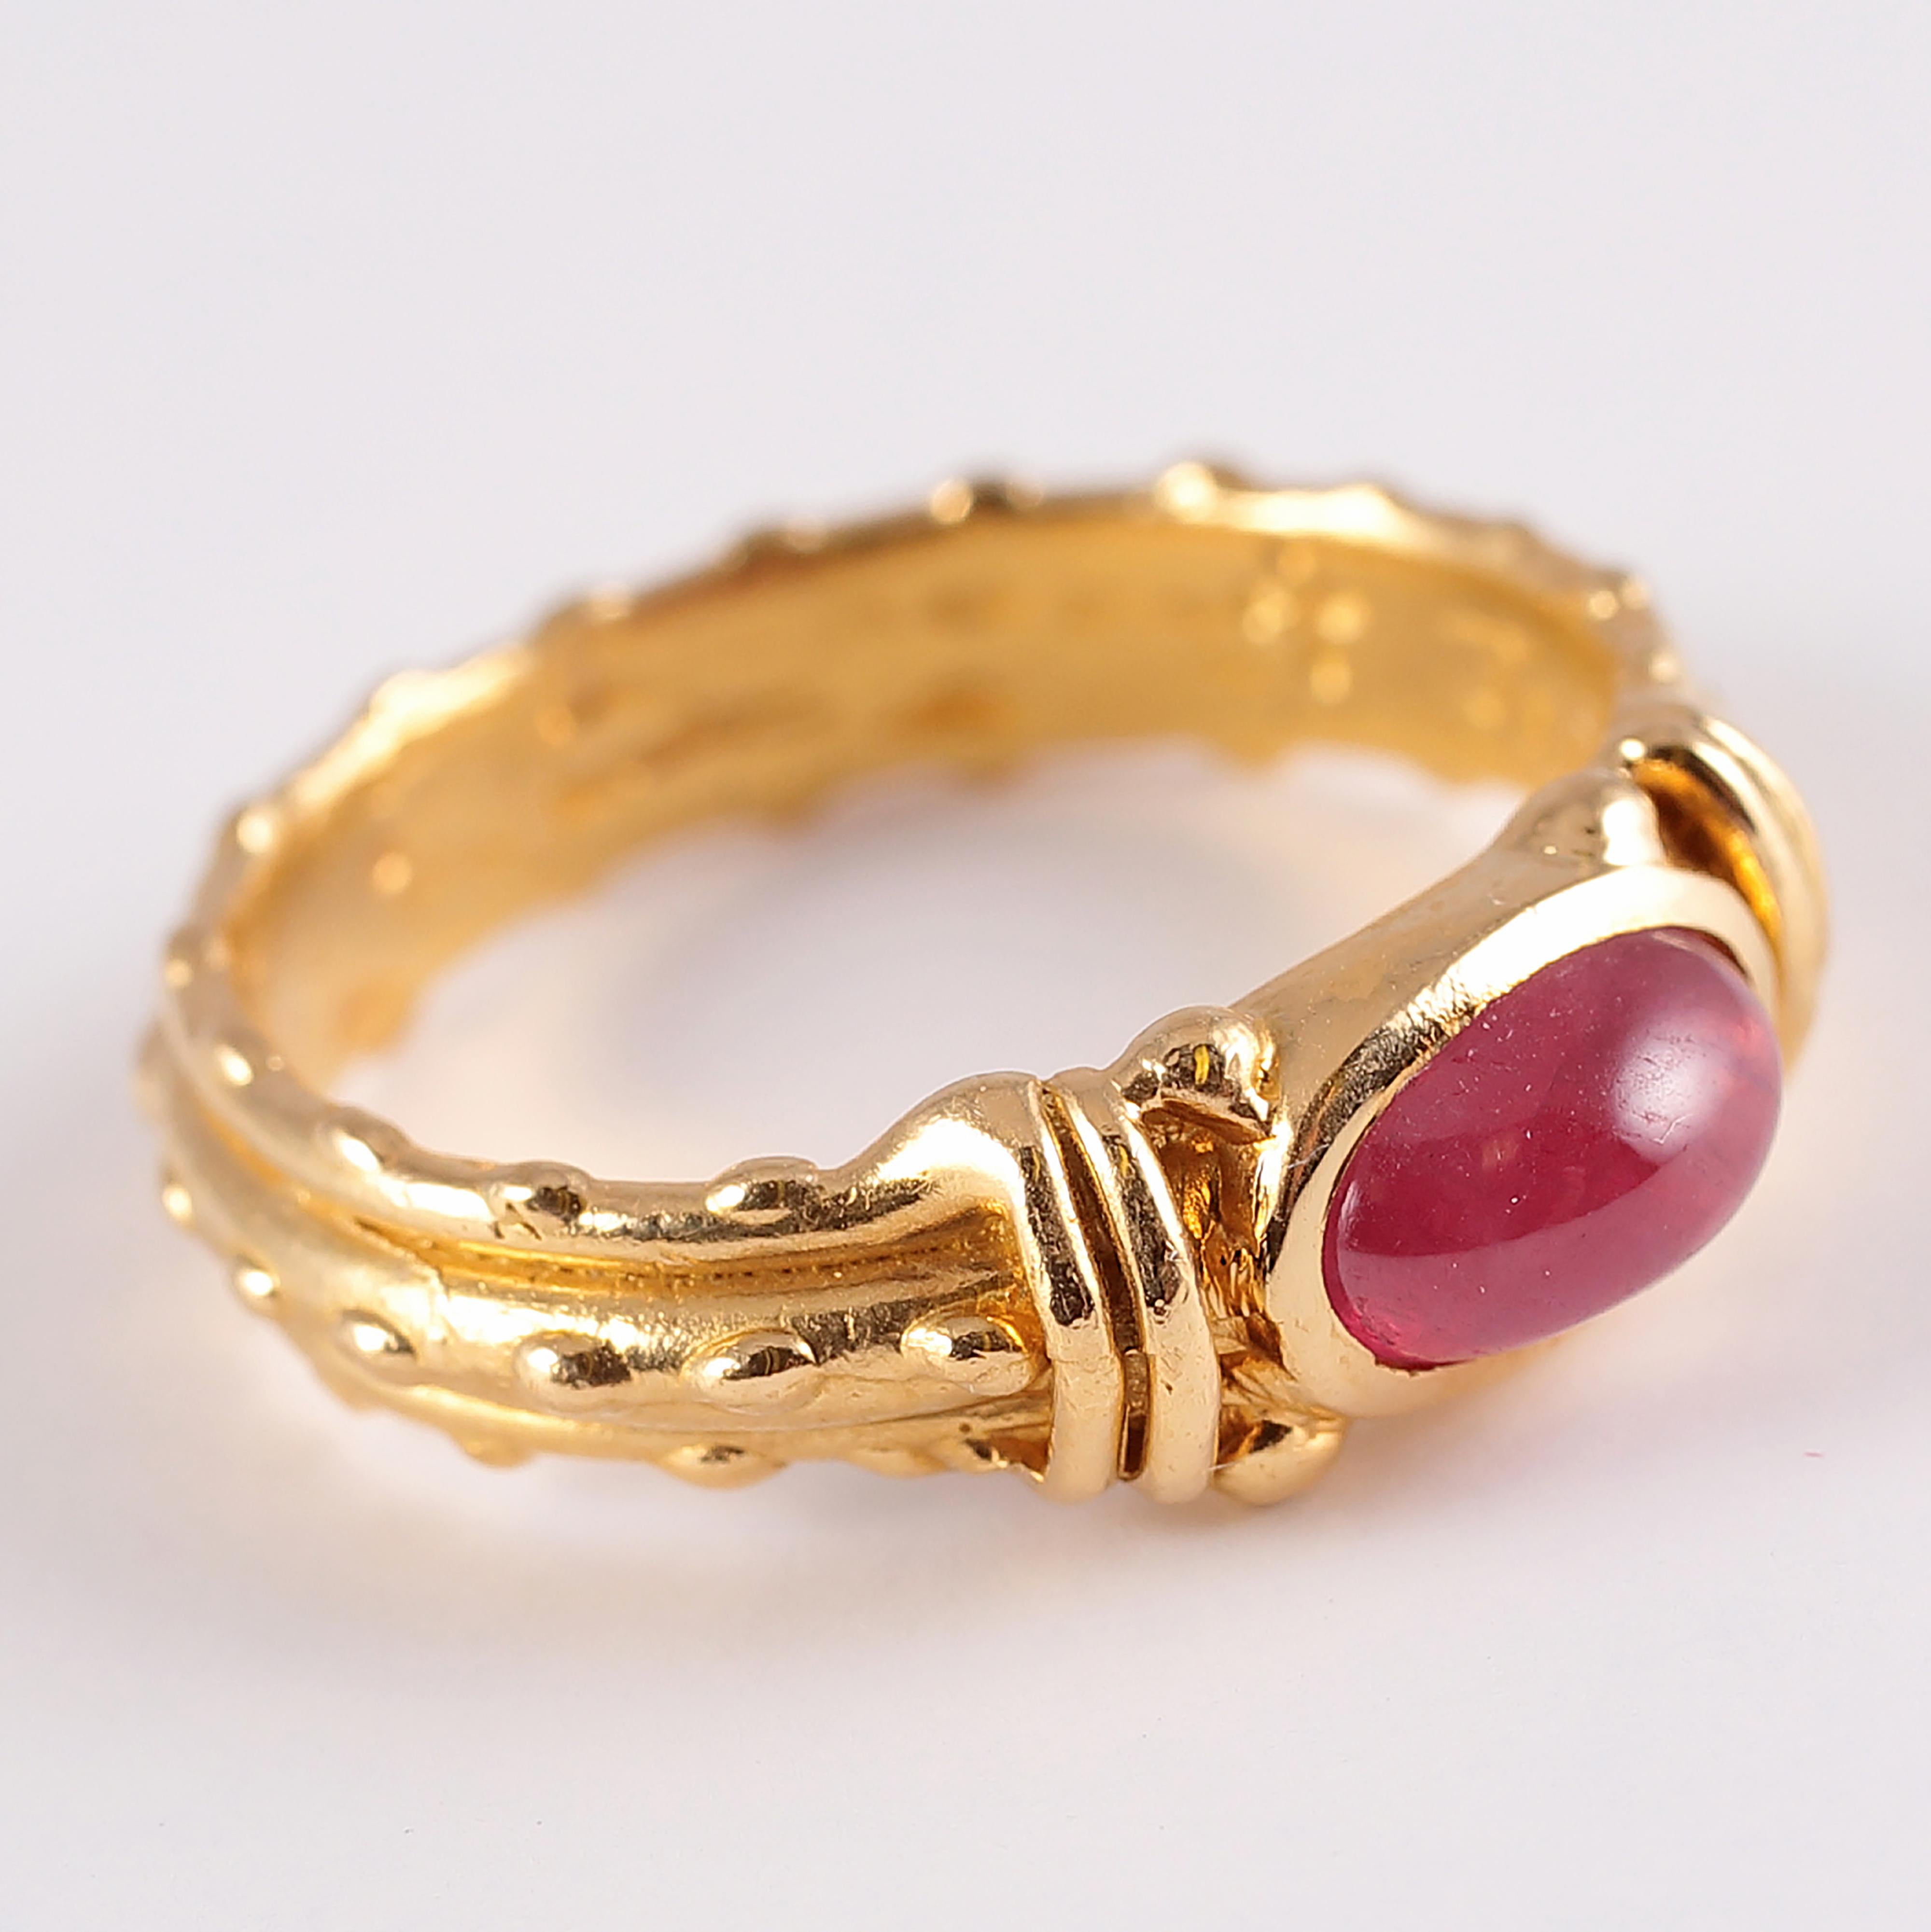 Women's or Men's 20 Karat Yellow Gold Ruby Ring by Tiana Wages